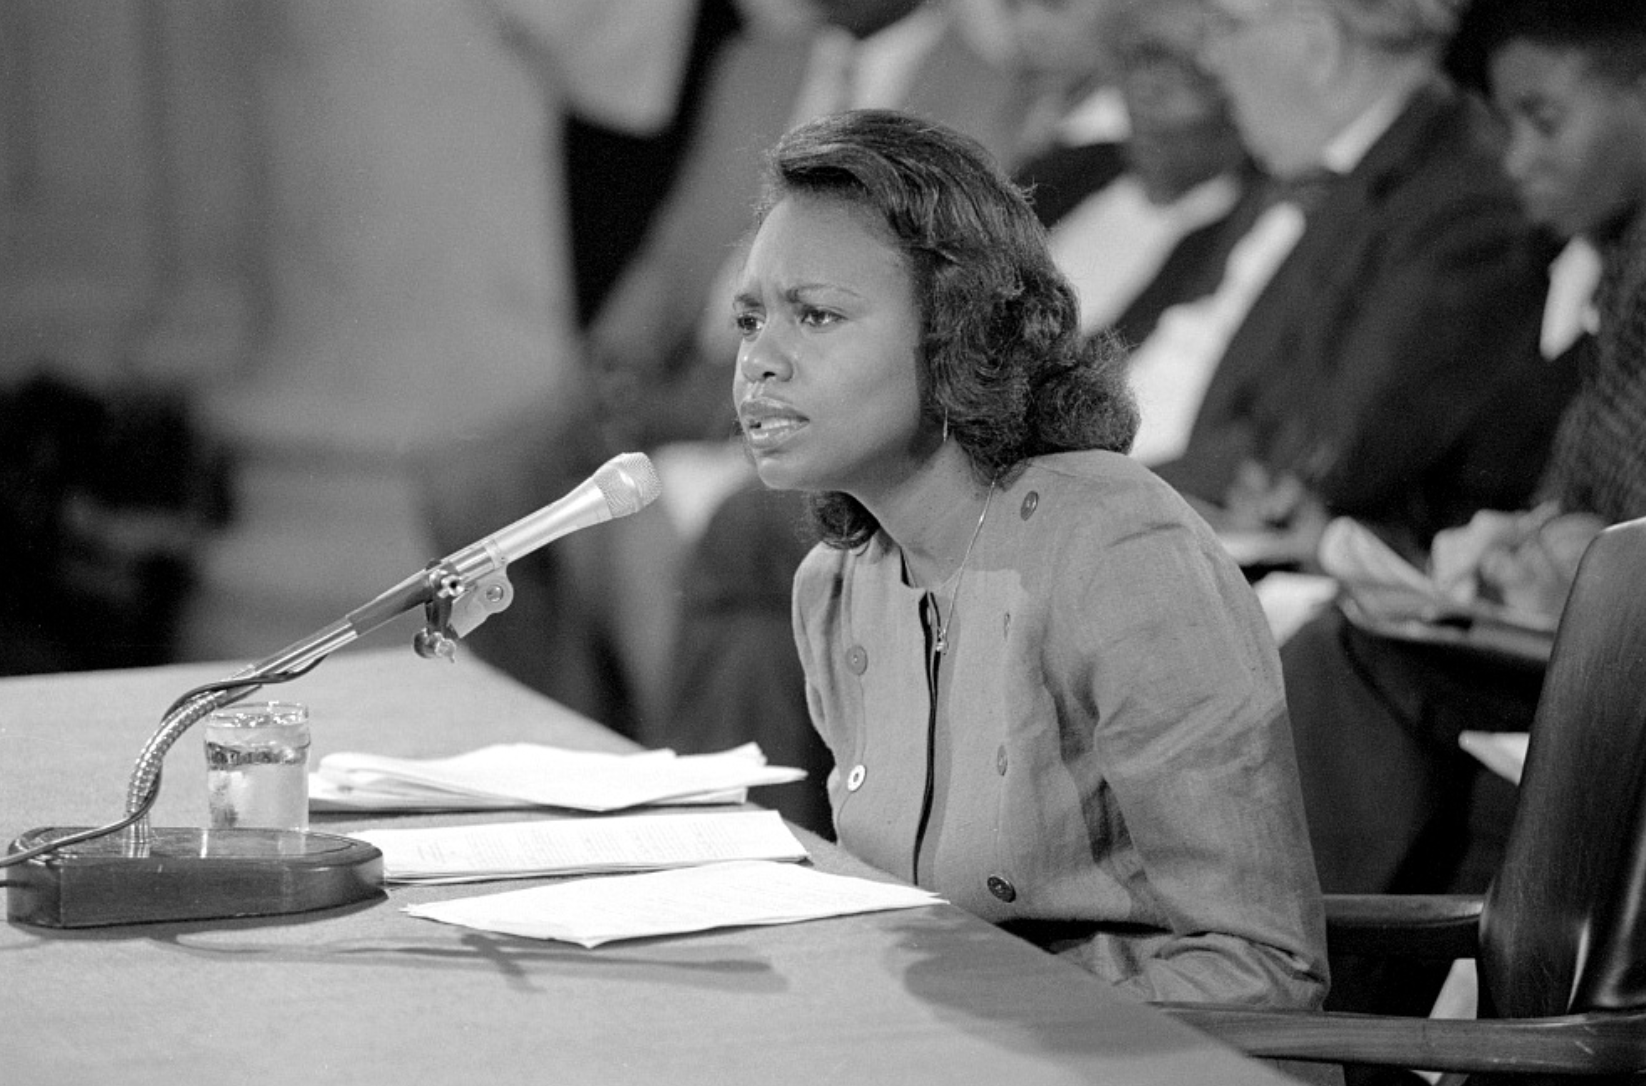 Anita Hill testifying in front of the Senate Judiciary Committee during Clarence Thomas's Supreme Court confirmation hearing.